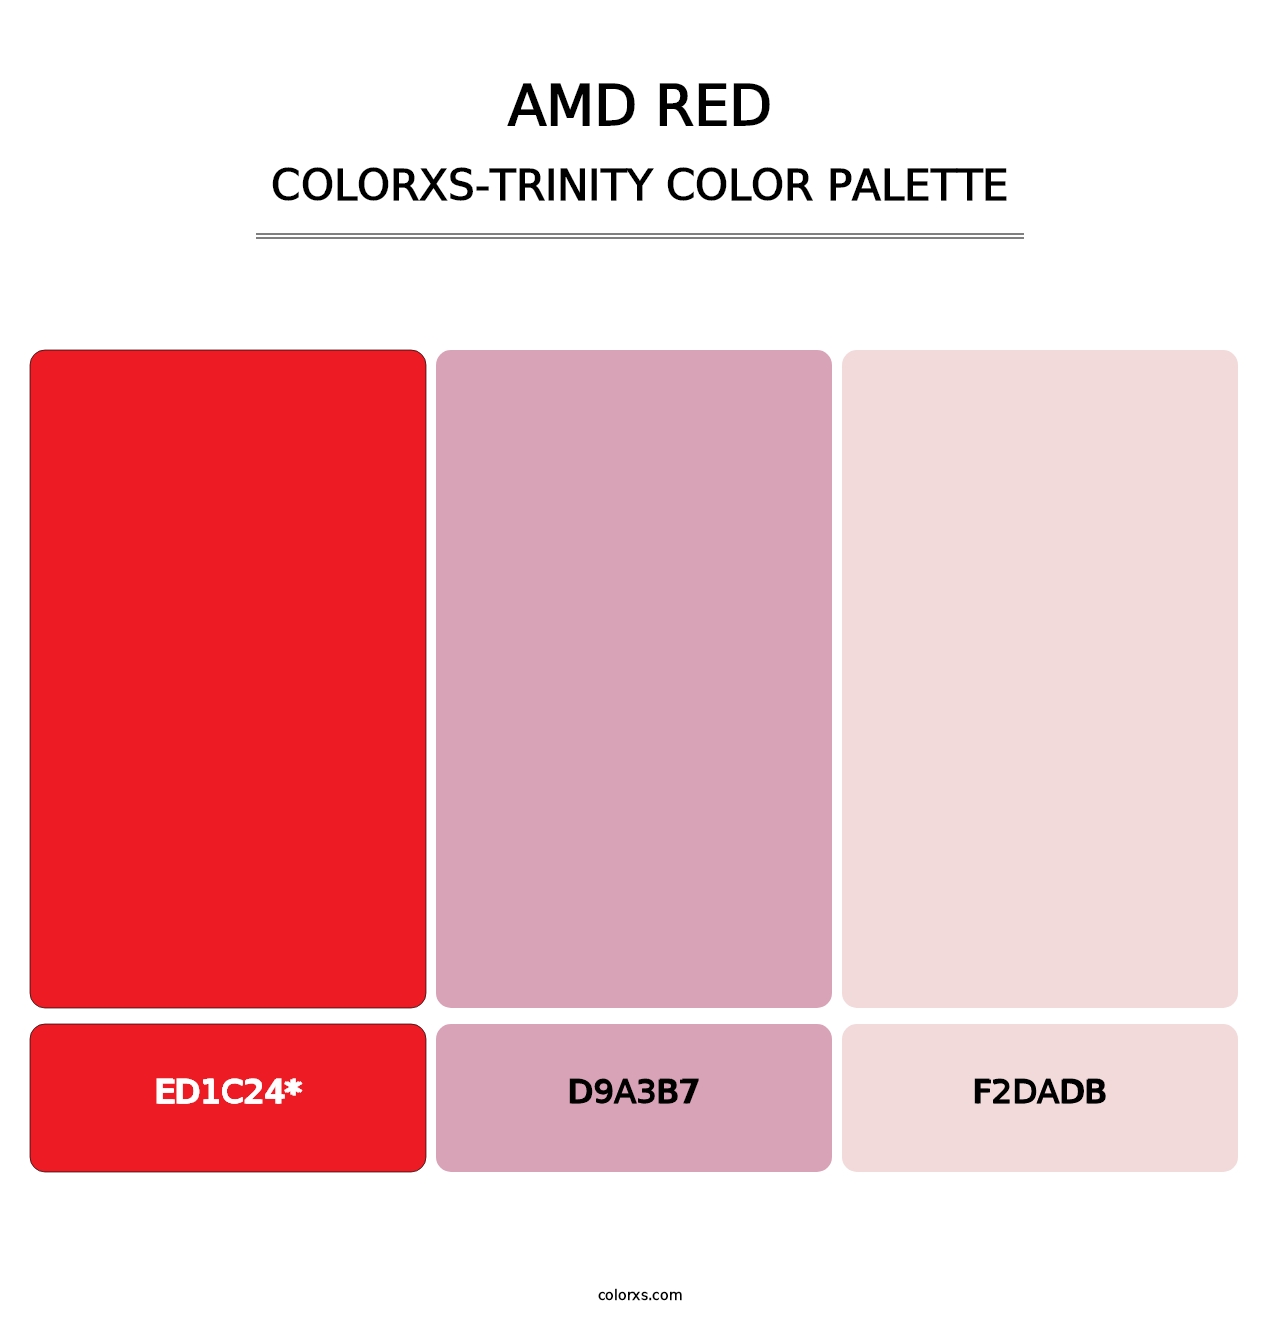 AMD Red - Colorxs Trinity Palette